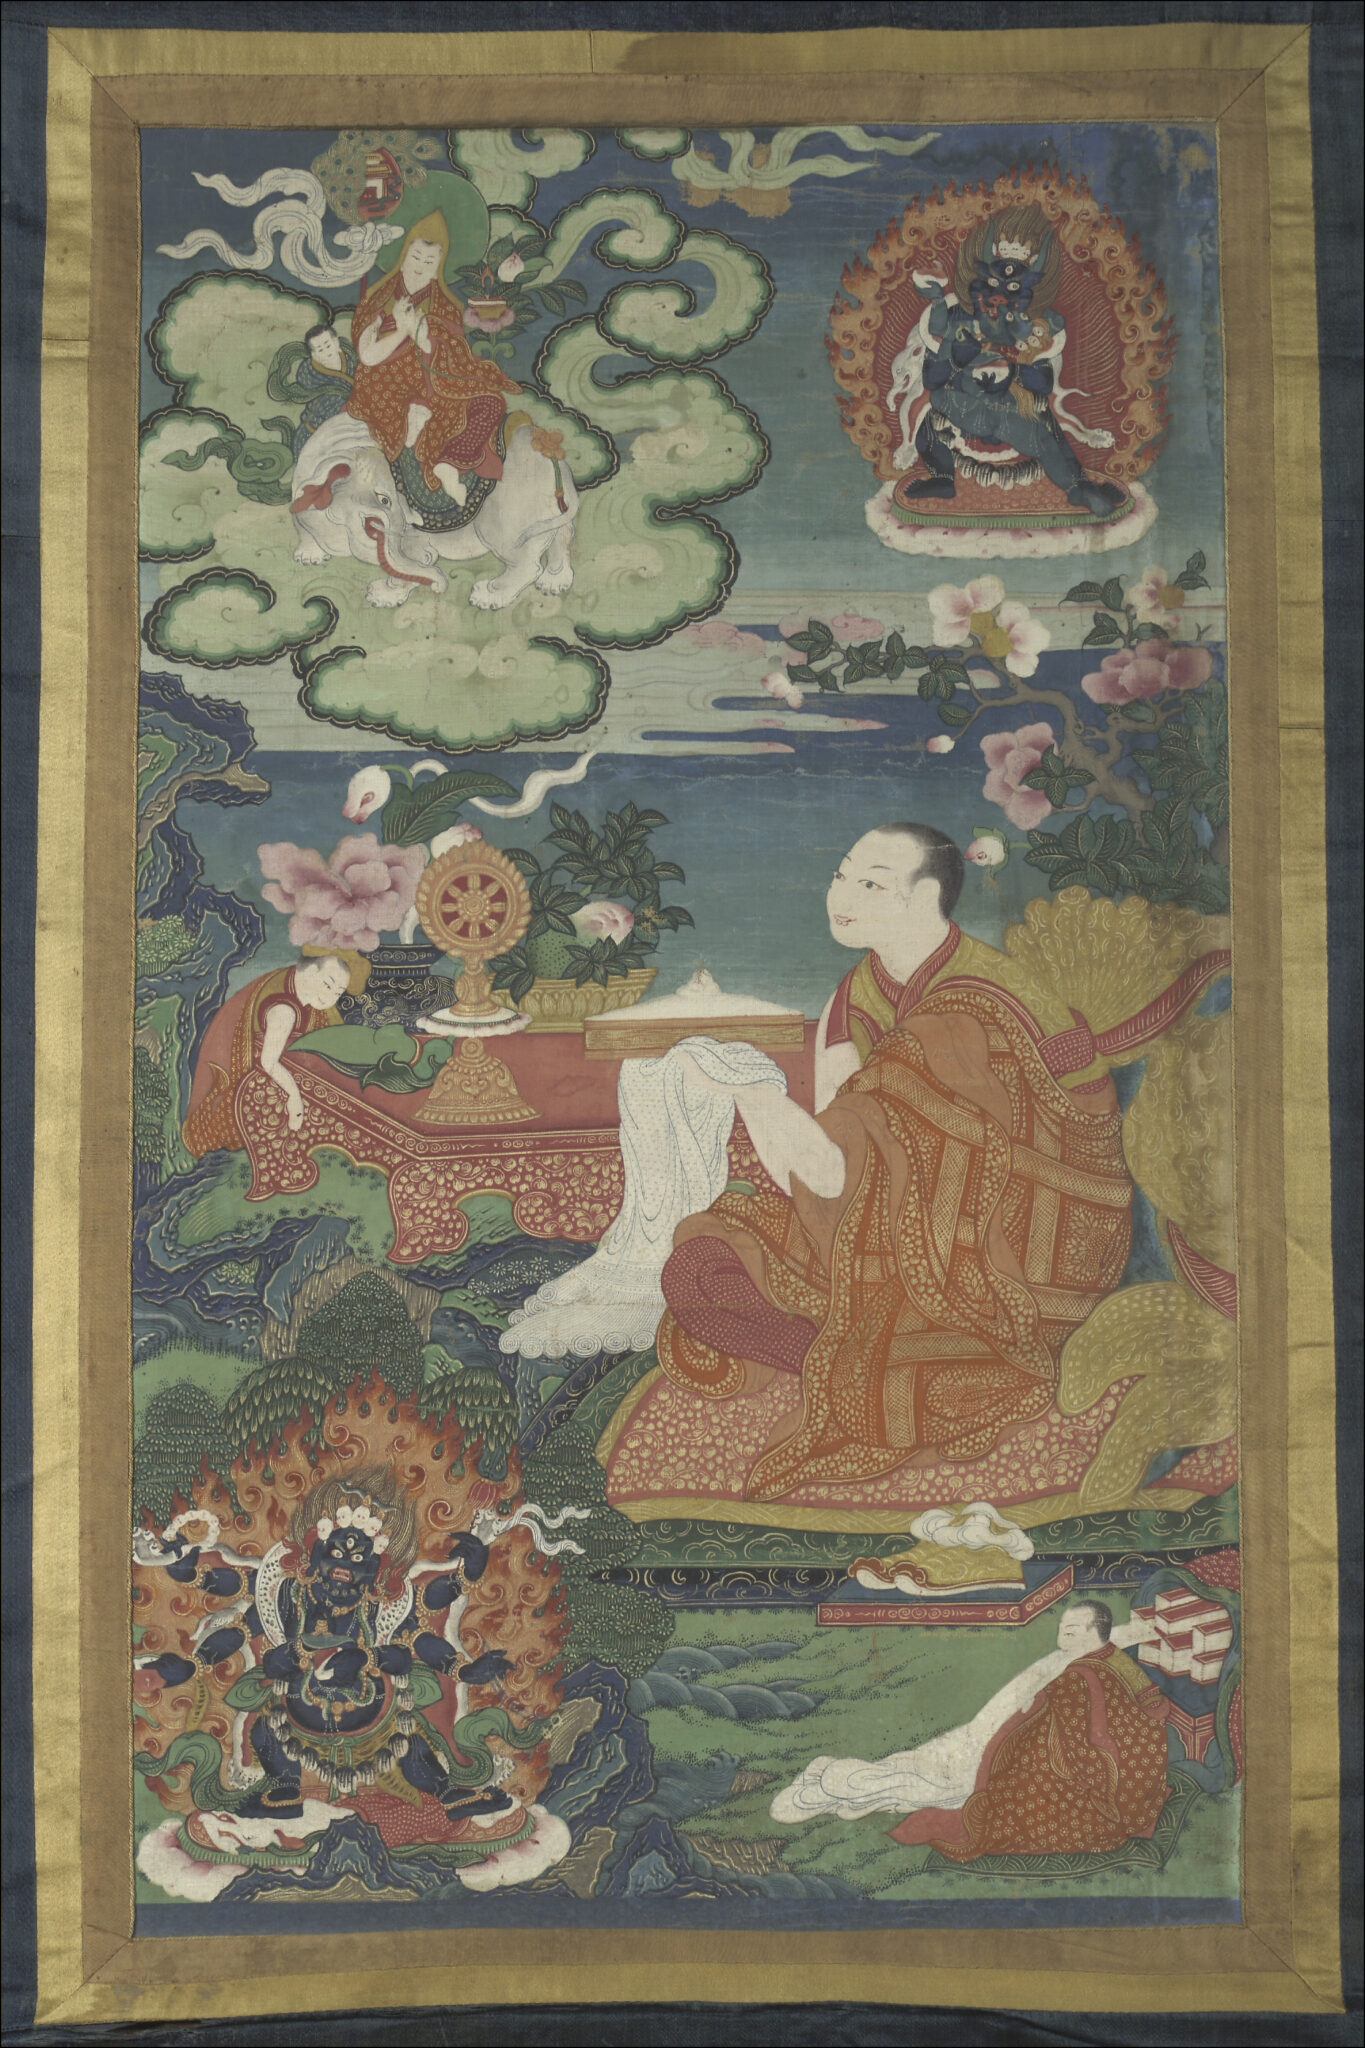 Lama wearing saffron patchwork robe, holding white prayer scarf, gazes at table adorned with implements and blossoms